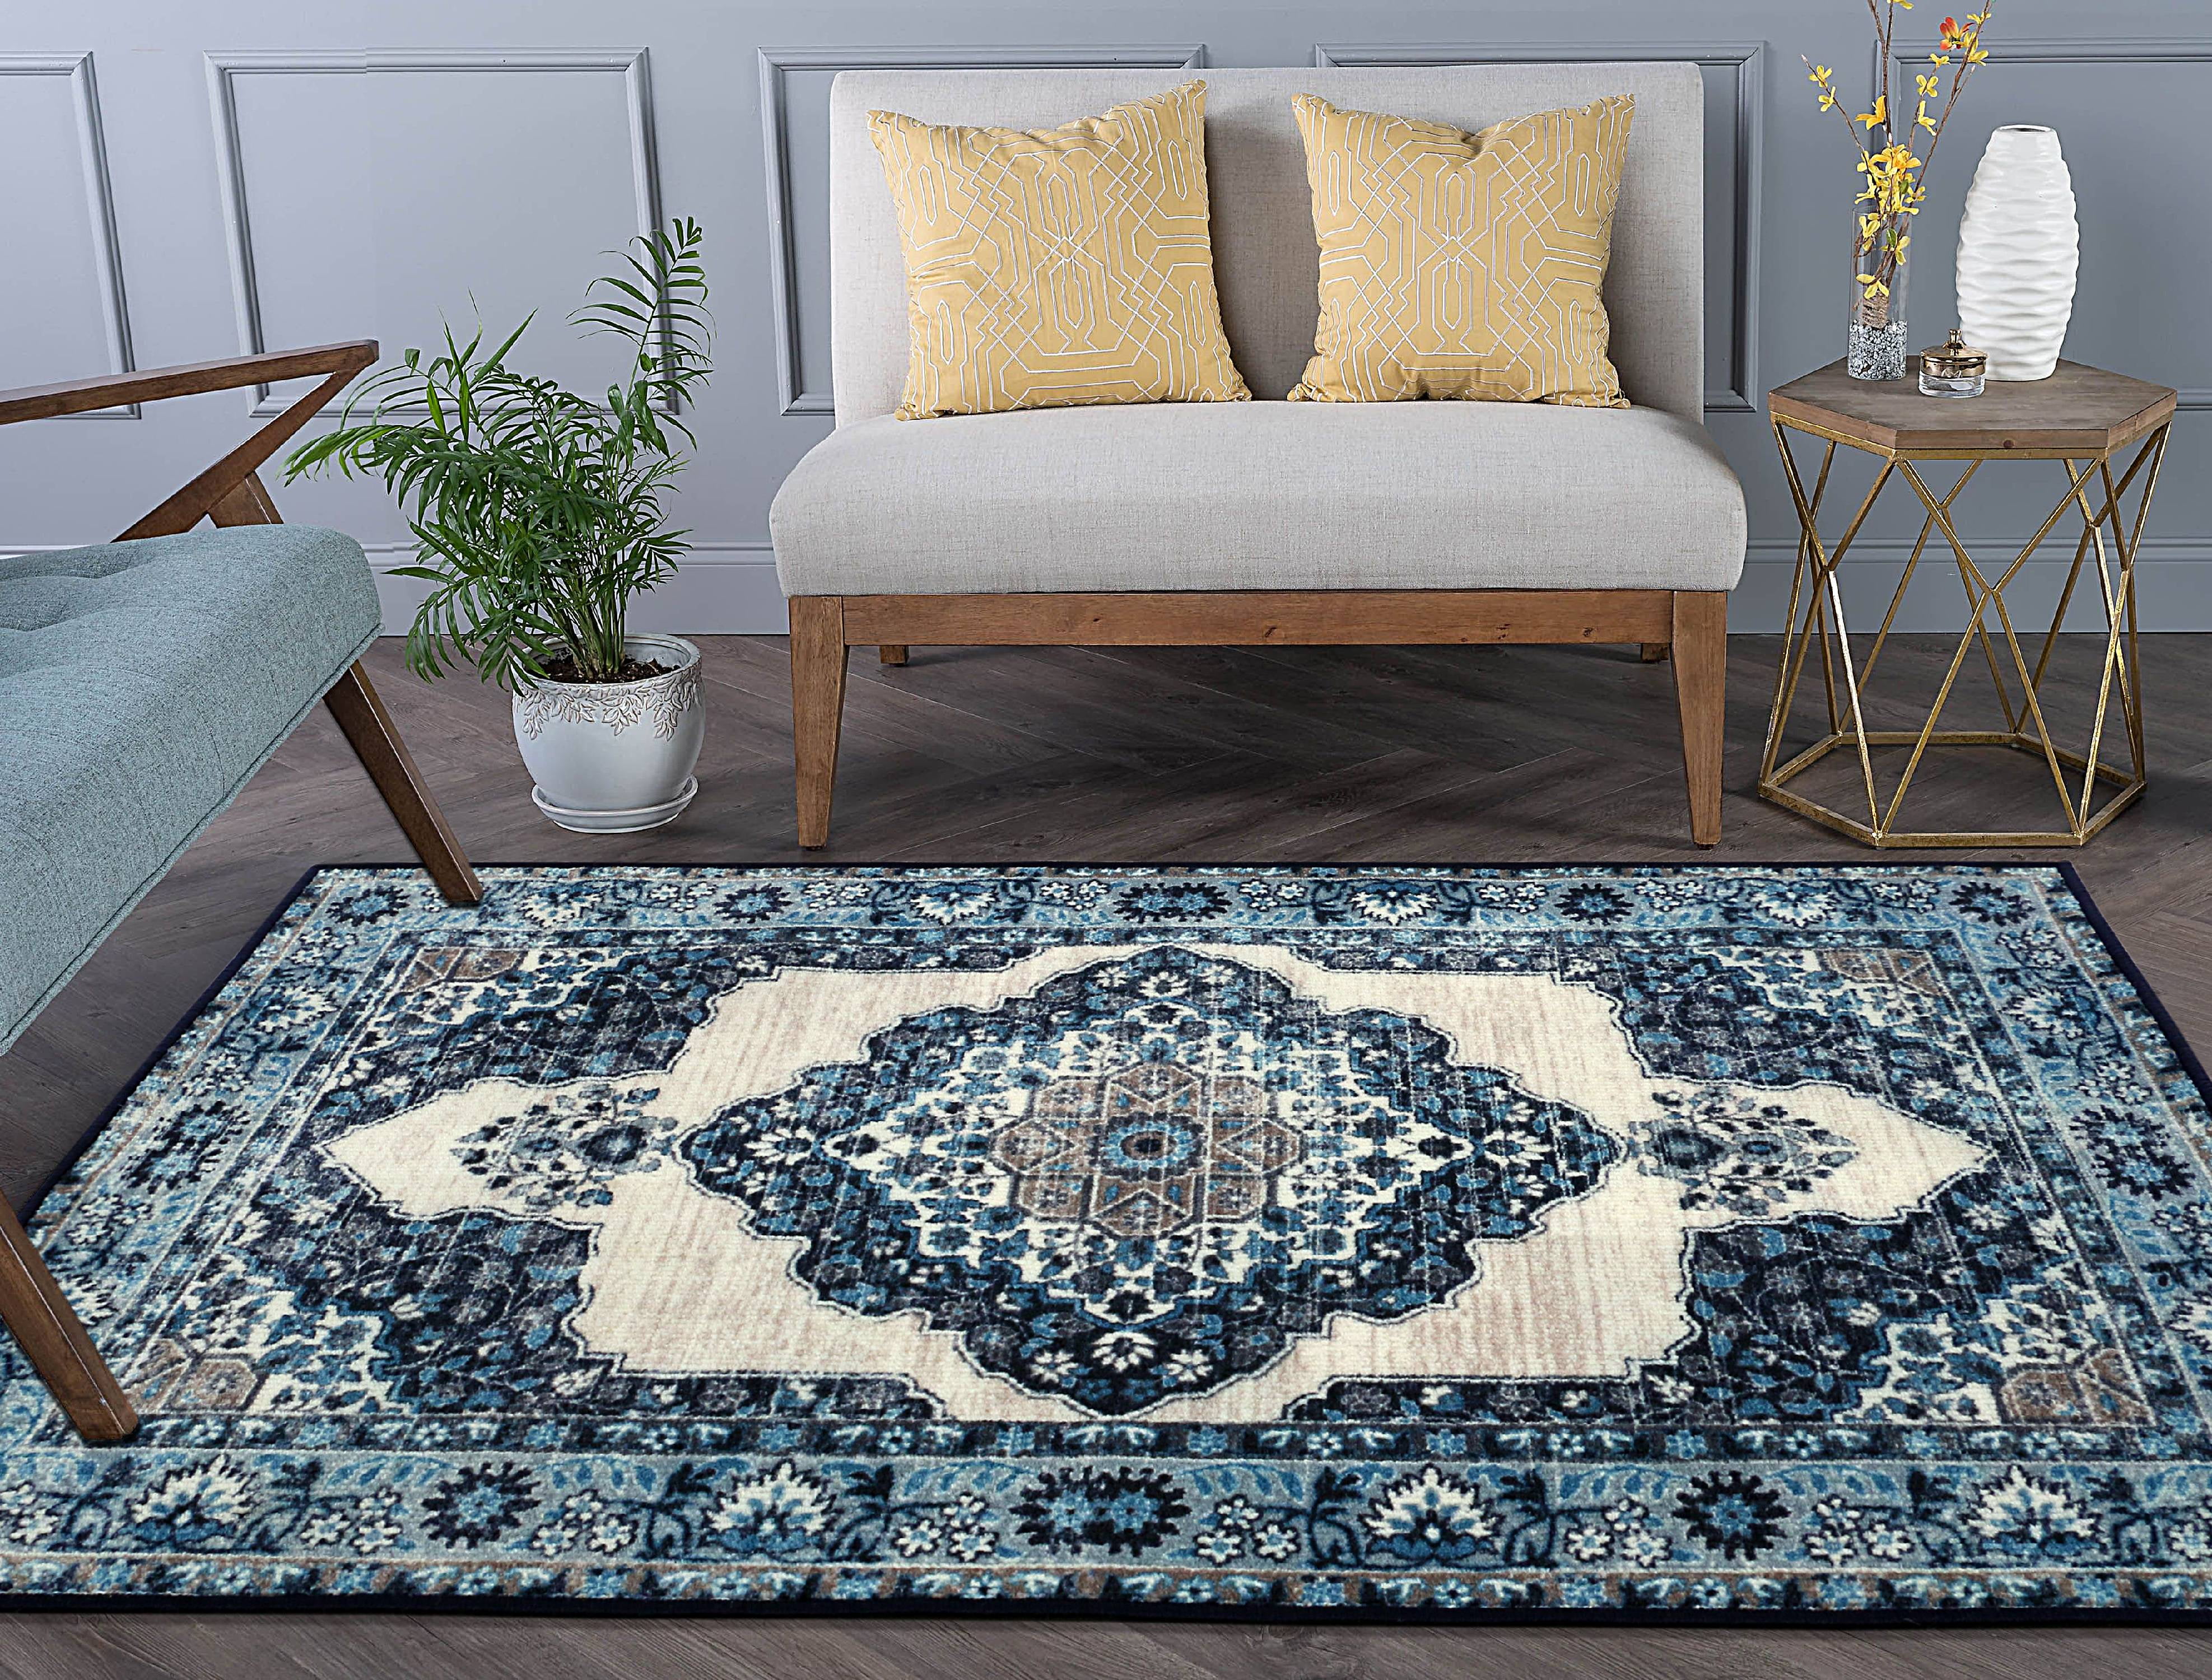 Details about   THROWS settee cover carpet 100% cotton rugs mat,SUN MOON,sun flower traditional 